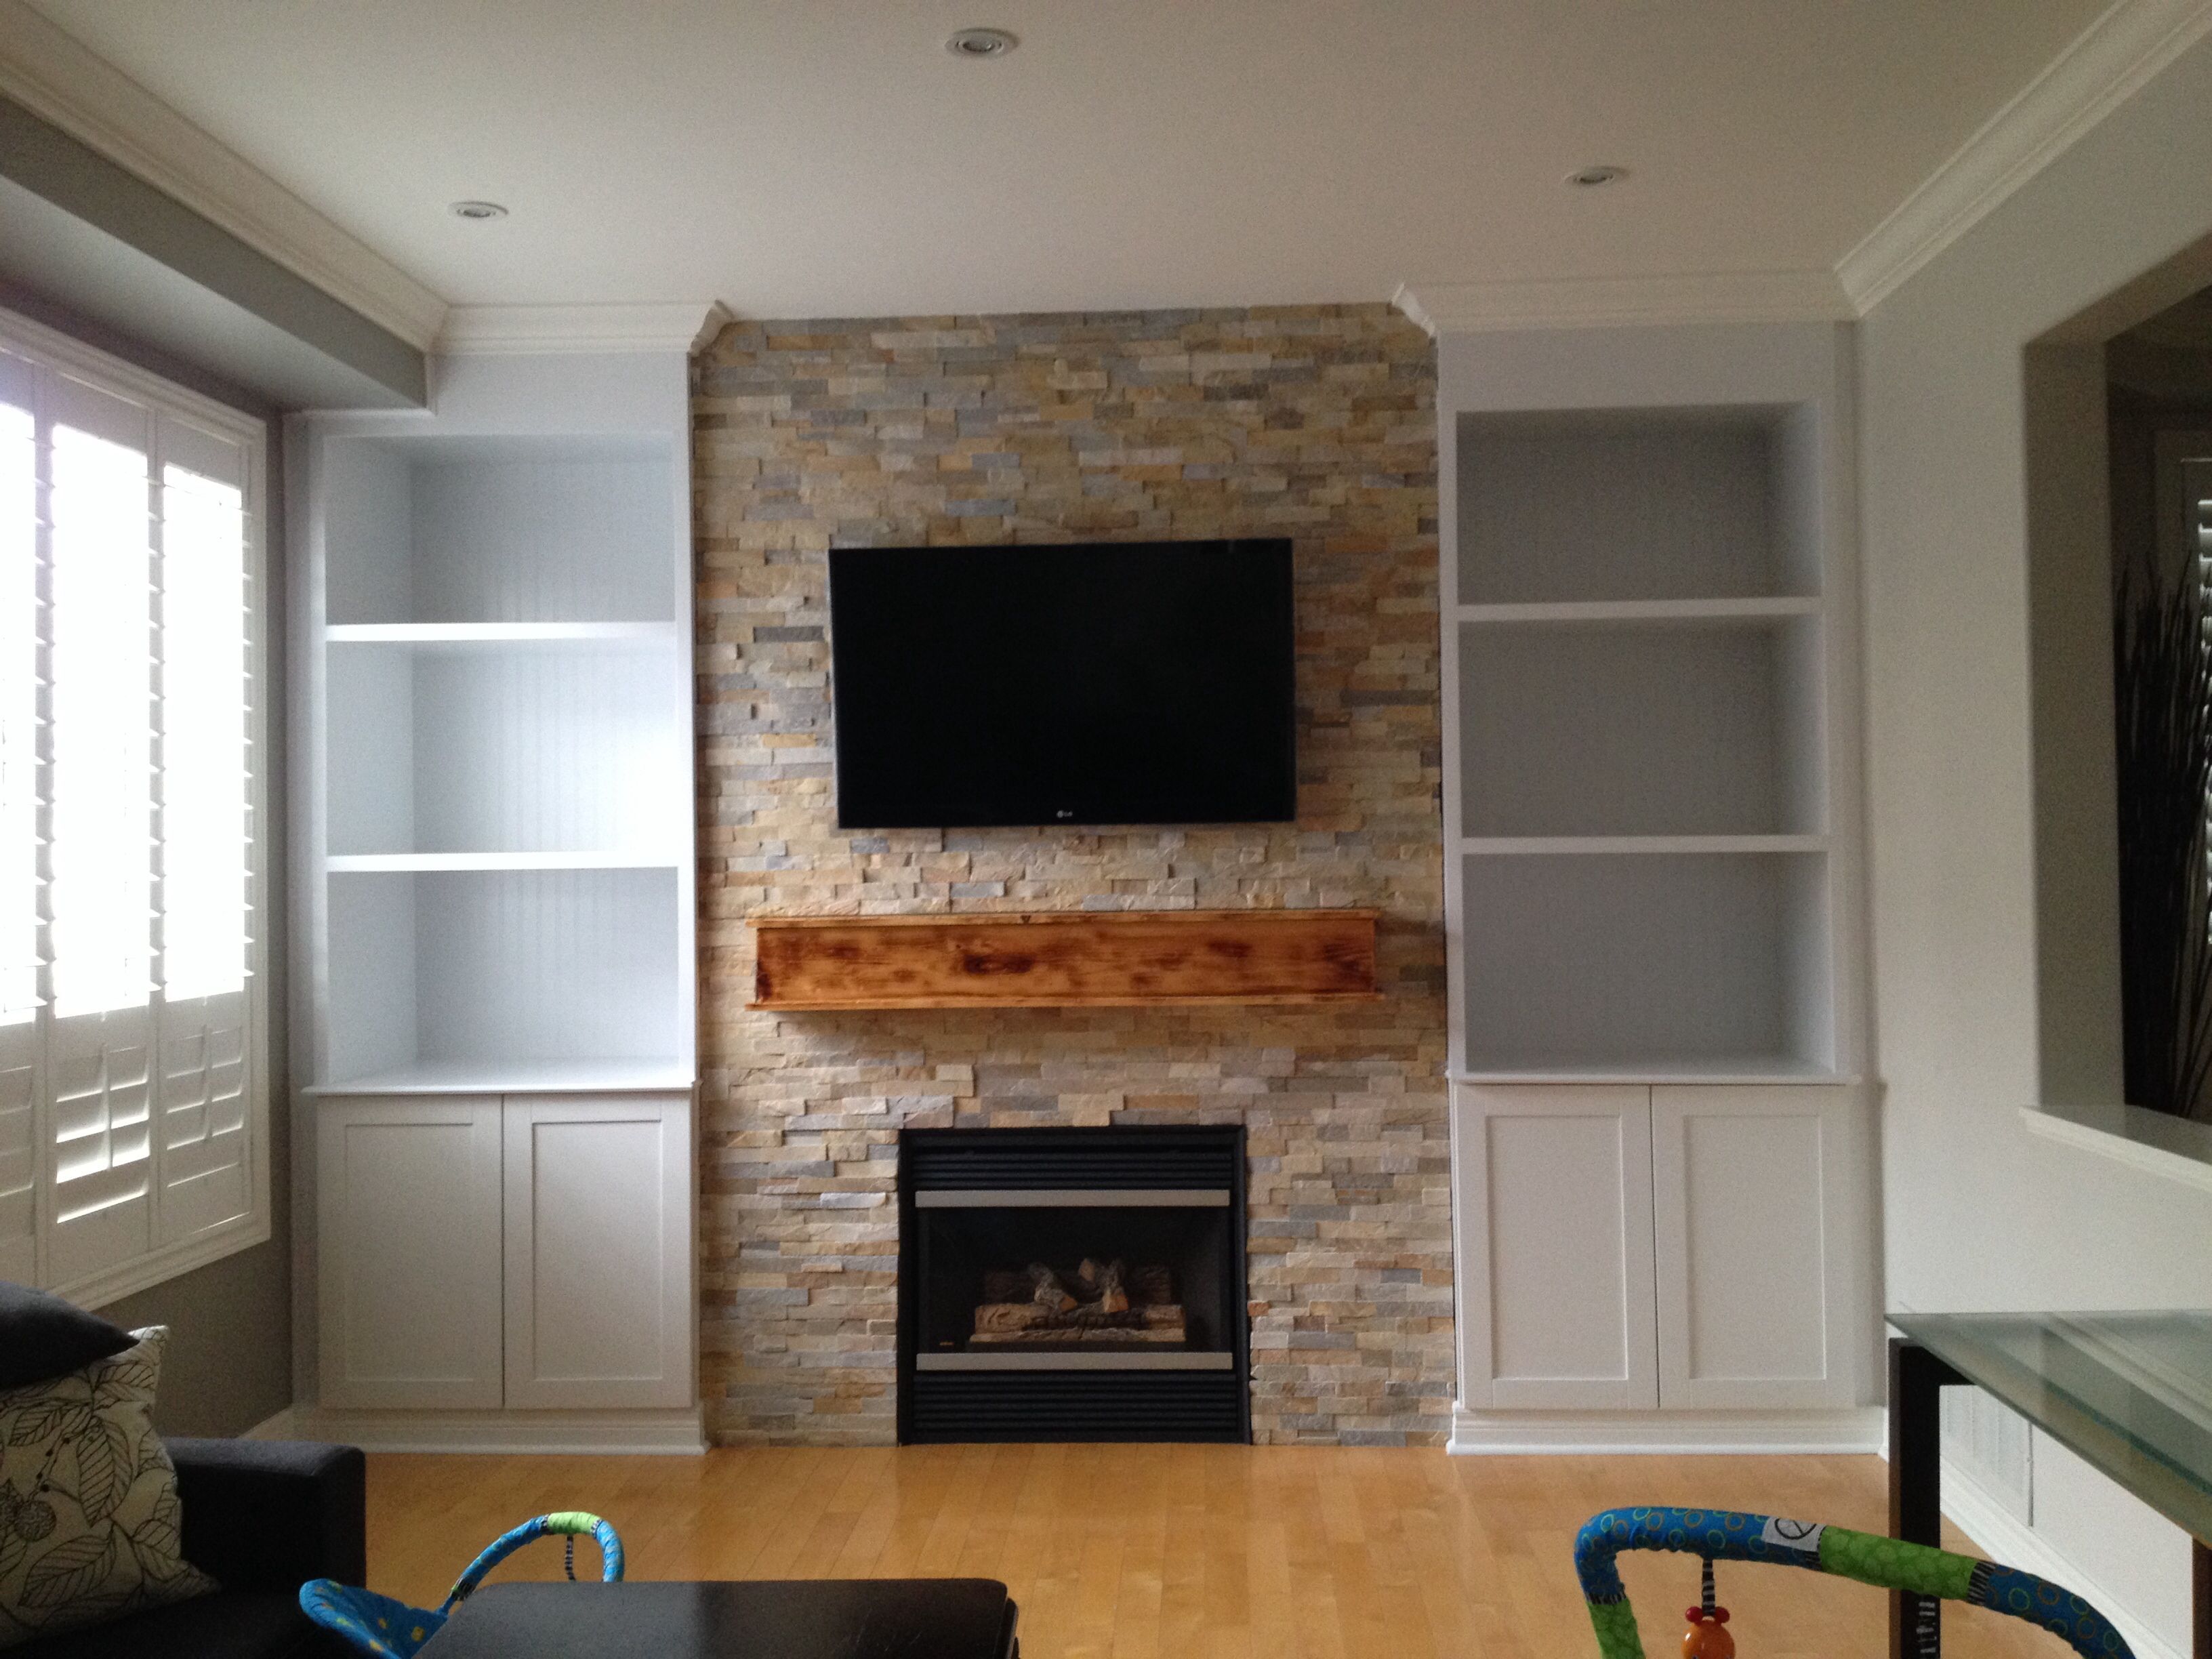 Built In Wall Units Built In Wall Unit Family Room Eclectic With Regarding Full Wall Shelving Units (View 11 of 15)